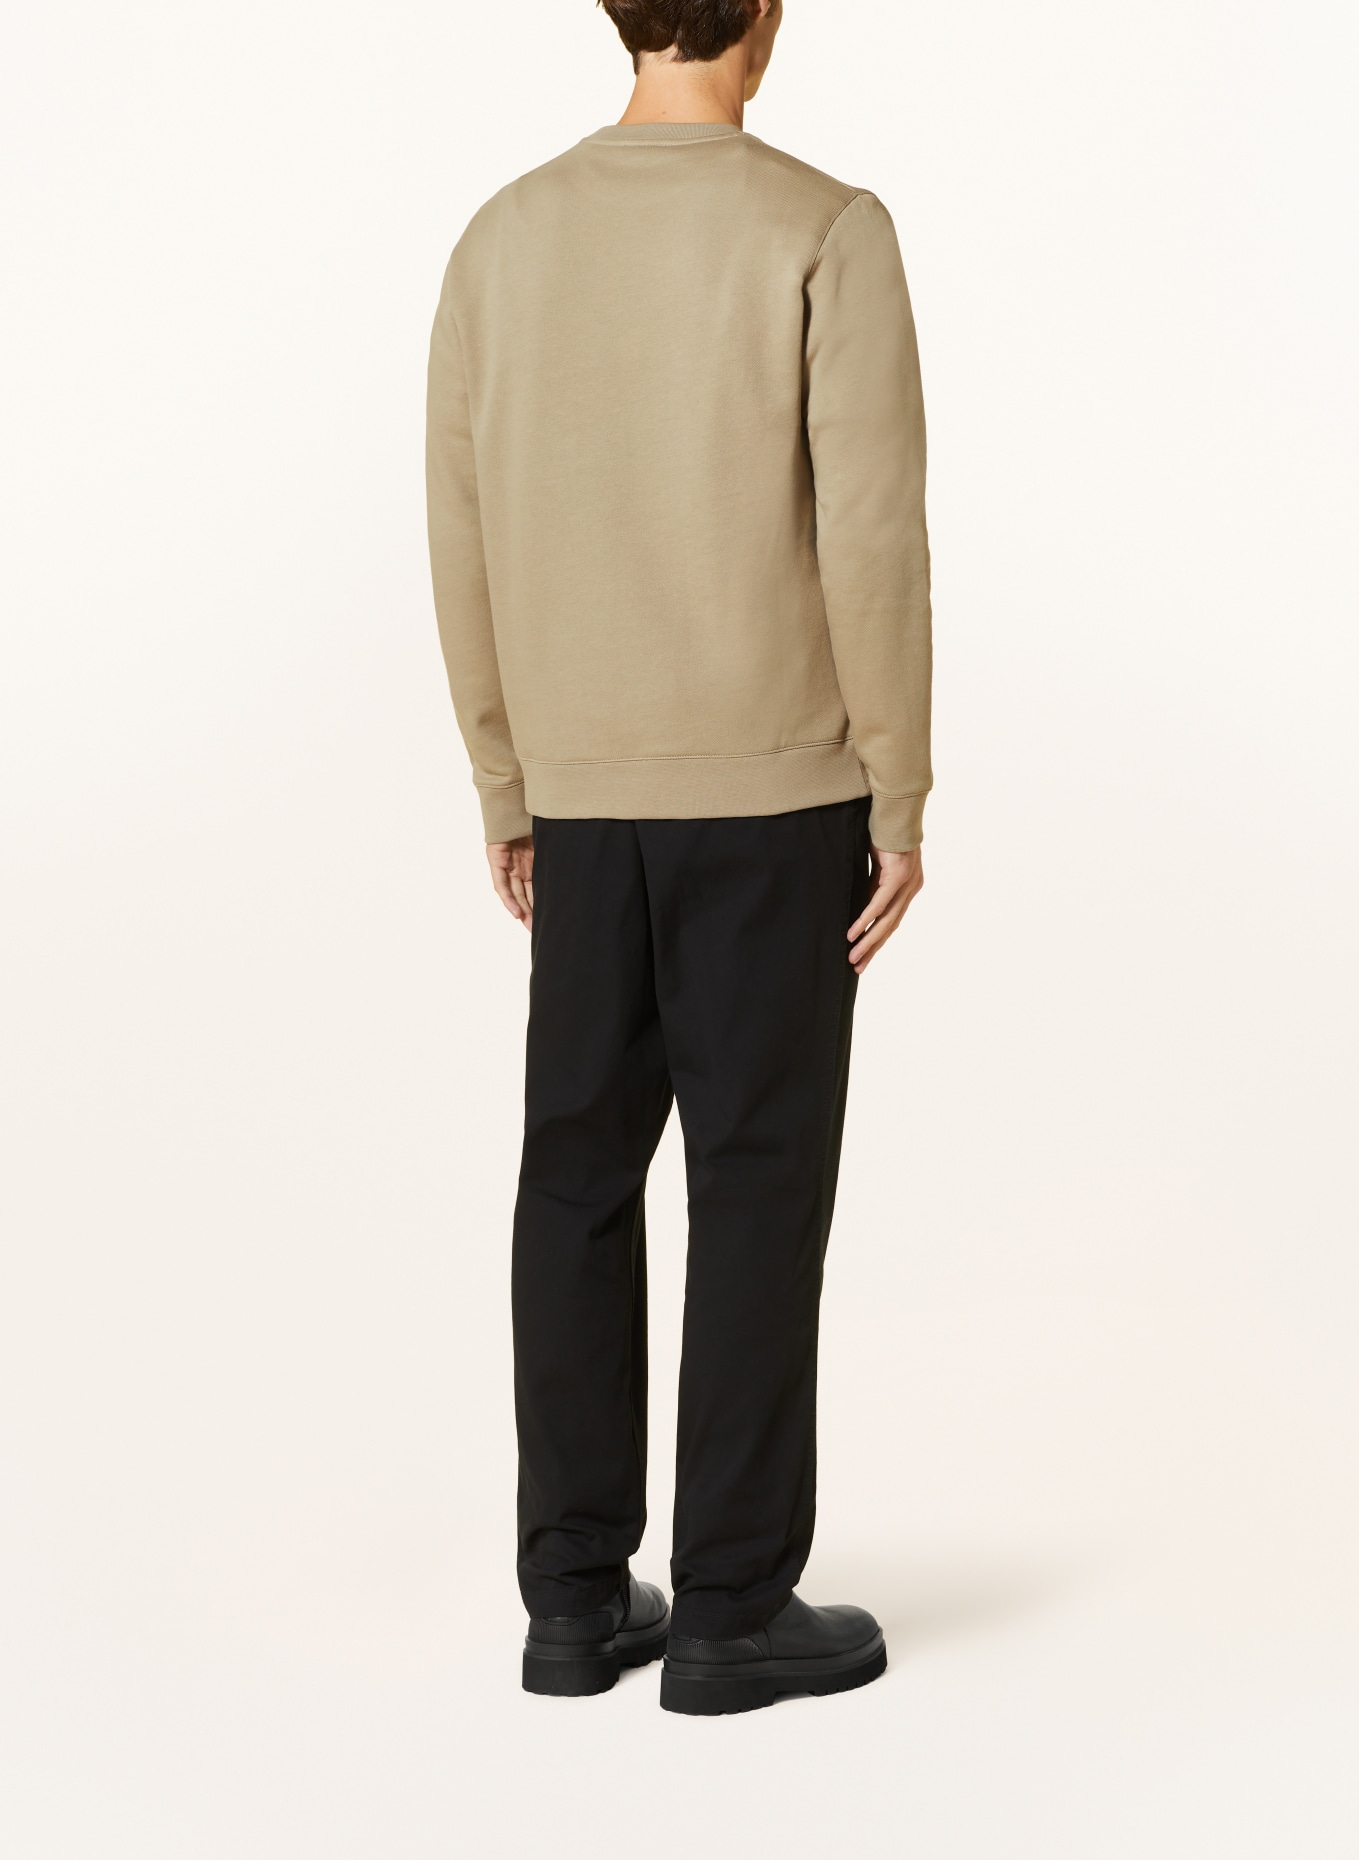 NORSE PROJECTS Sweatshirt, Color: BEIGE (Image 3)